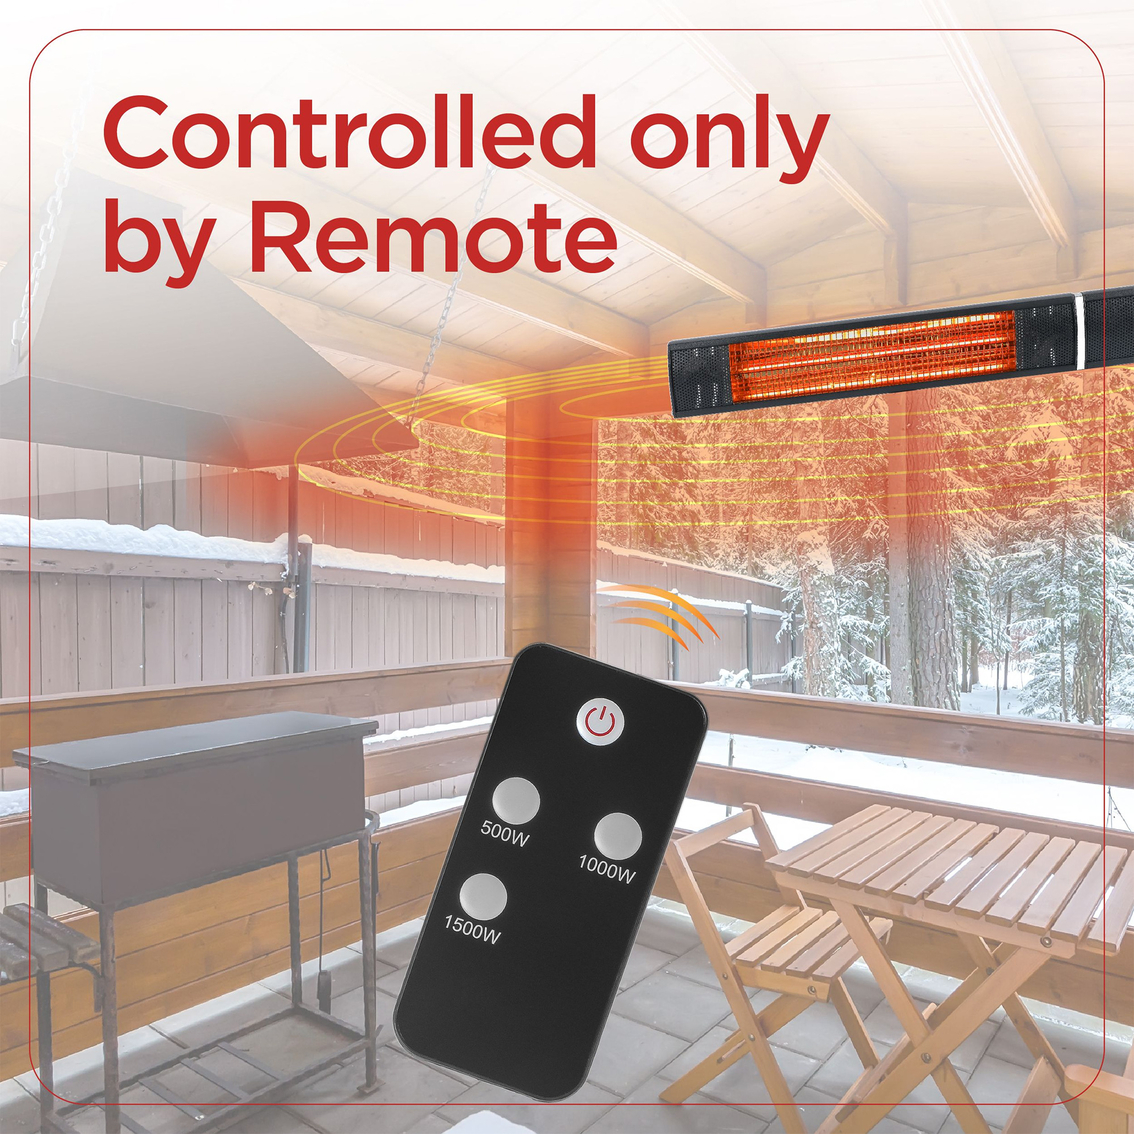 Black + Decker Wall Mounted Electric Patio Heater with Remote Control Functions - Image 5 of 7